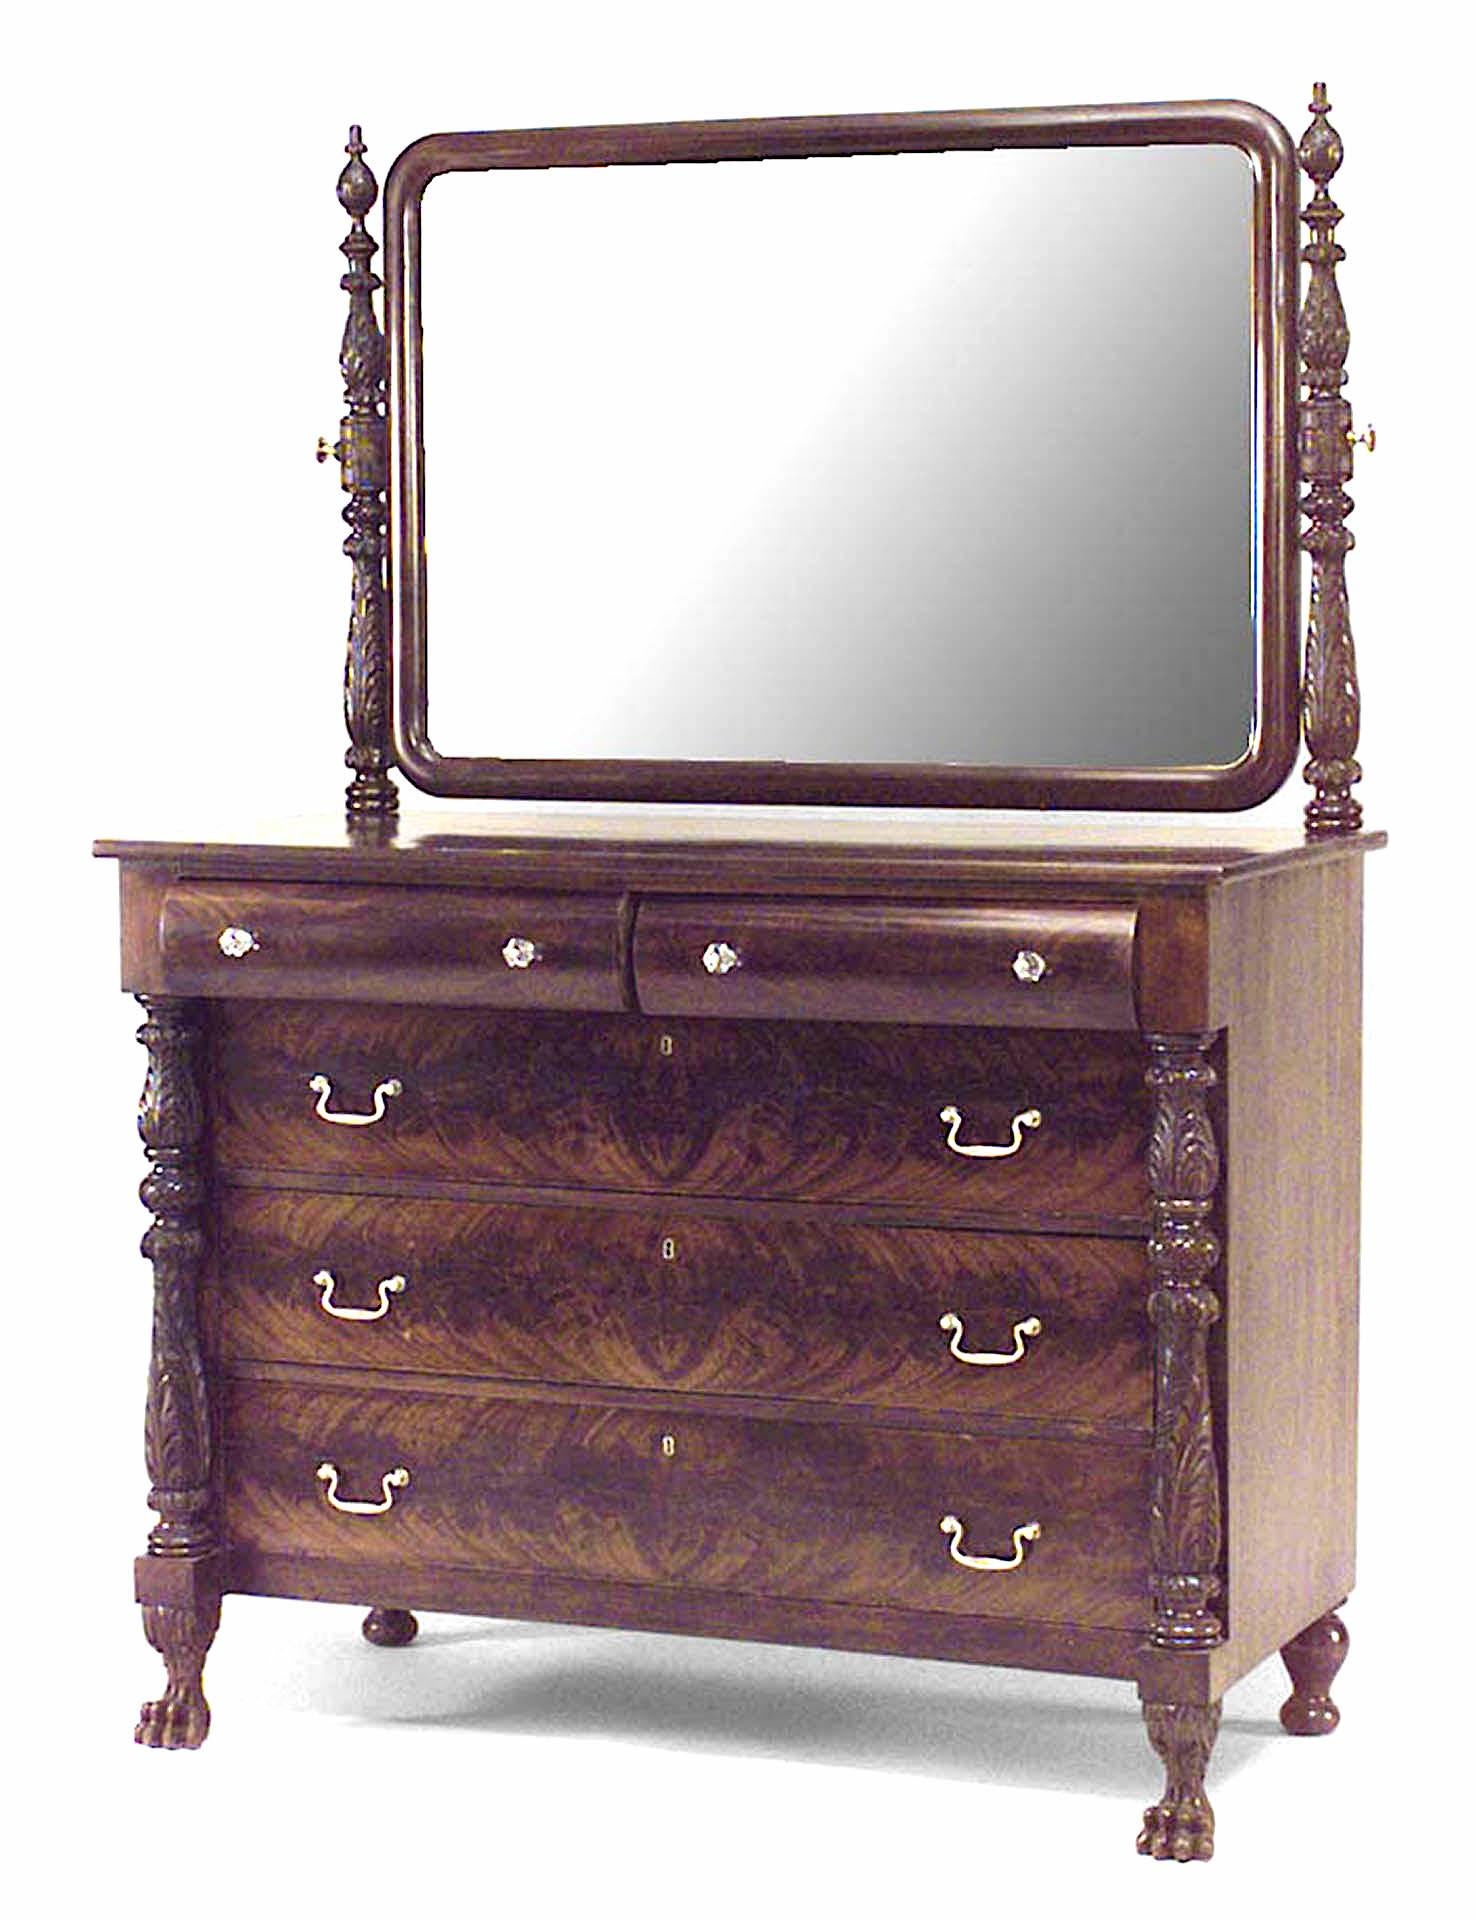 American Empire mahogany chest of drawers with carved pineapple finials and sides with swivel mirror top.
